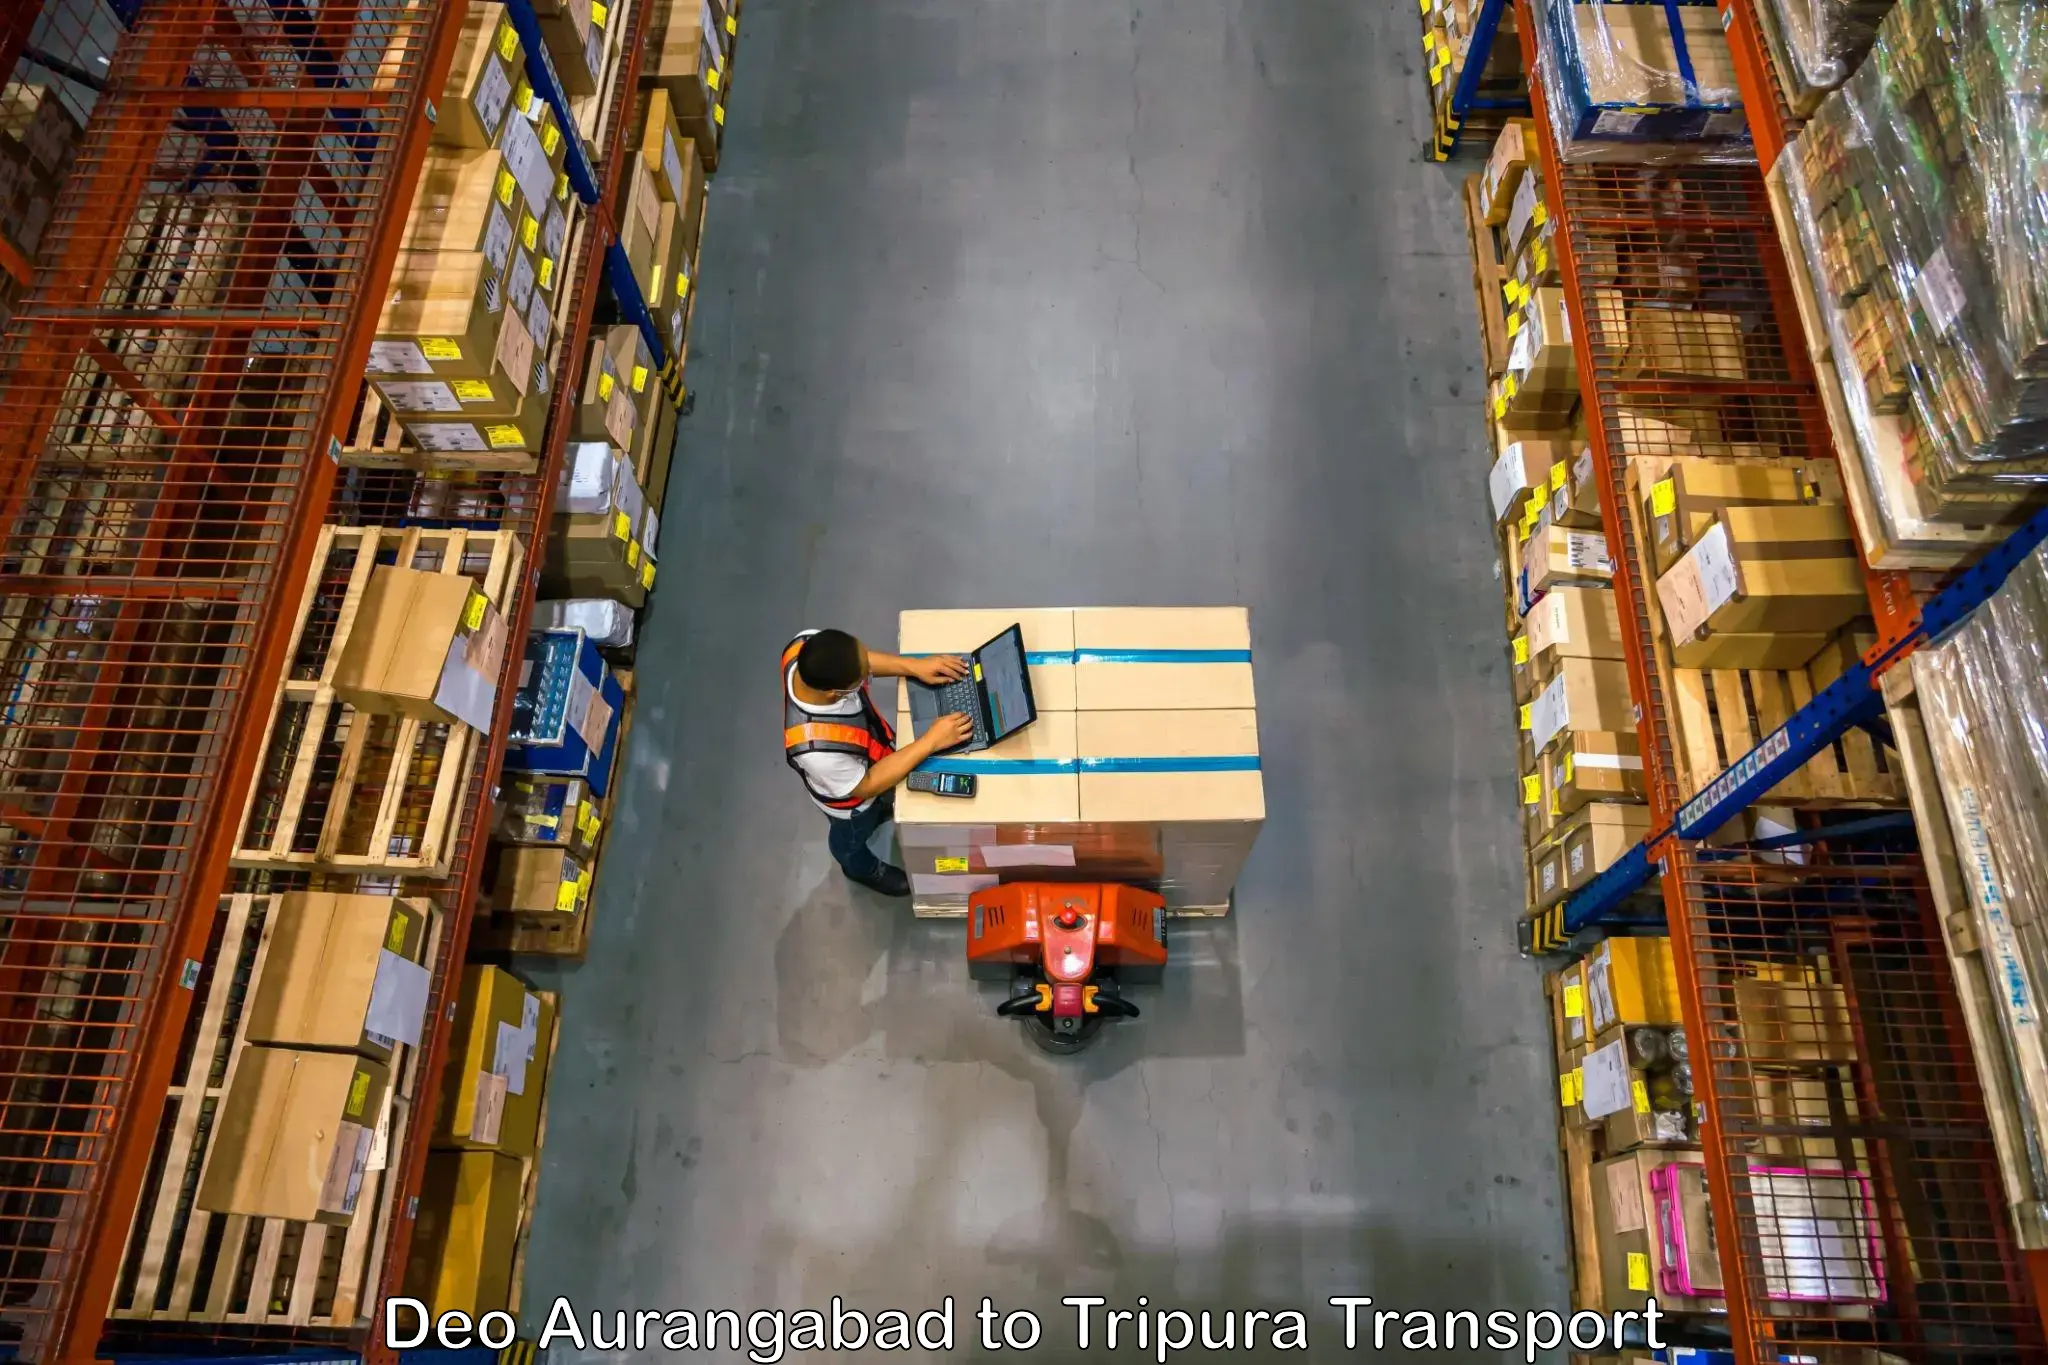 Shipping services Deo Aurangabad to Udaipur Tripura